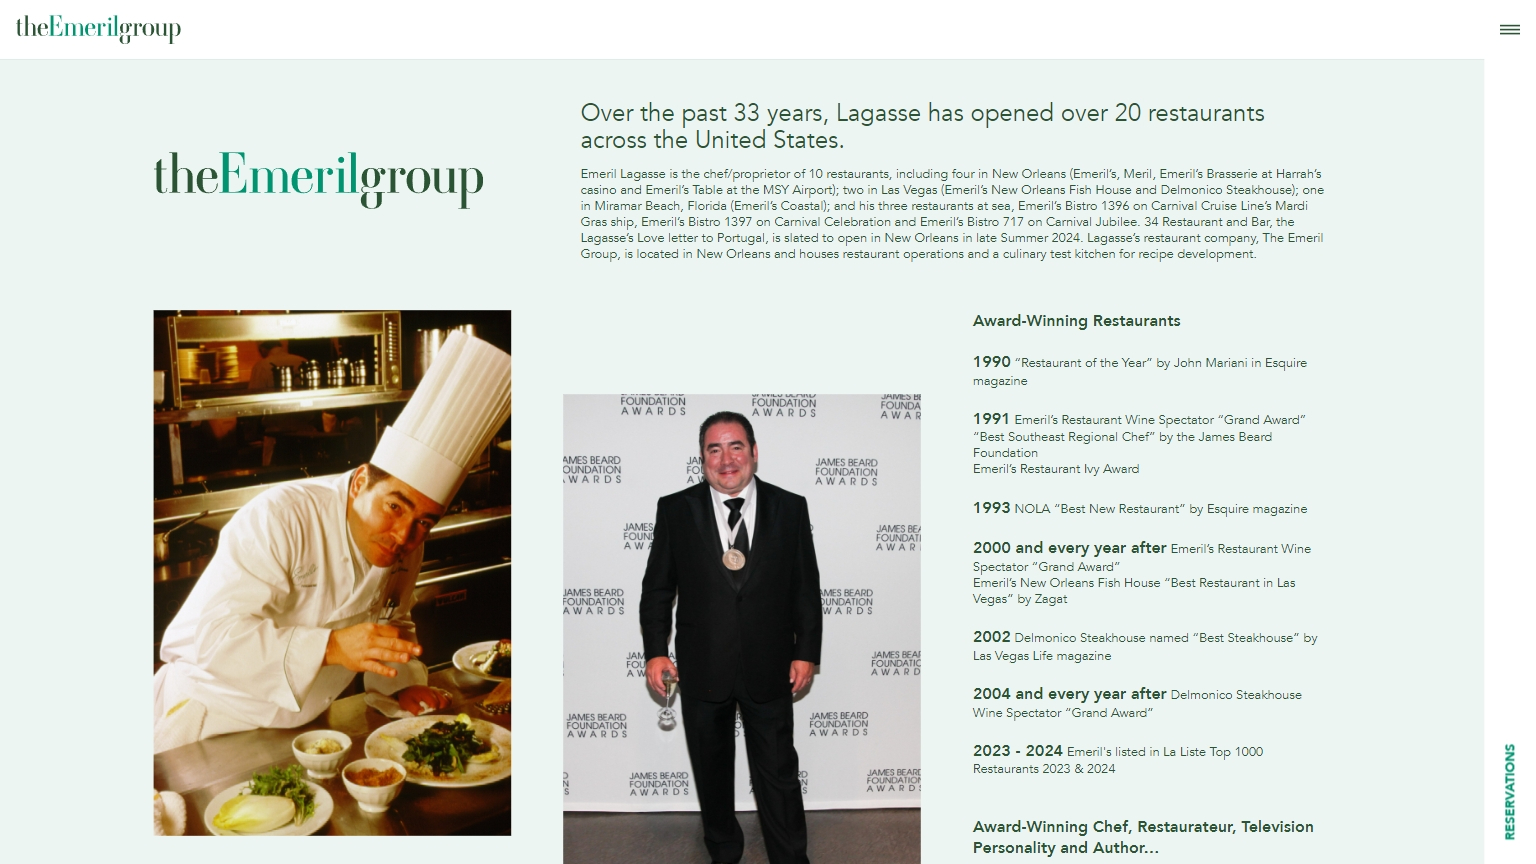 Scalable Restaurant Content | The Emeril Group Project